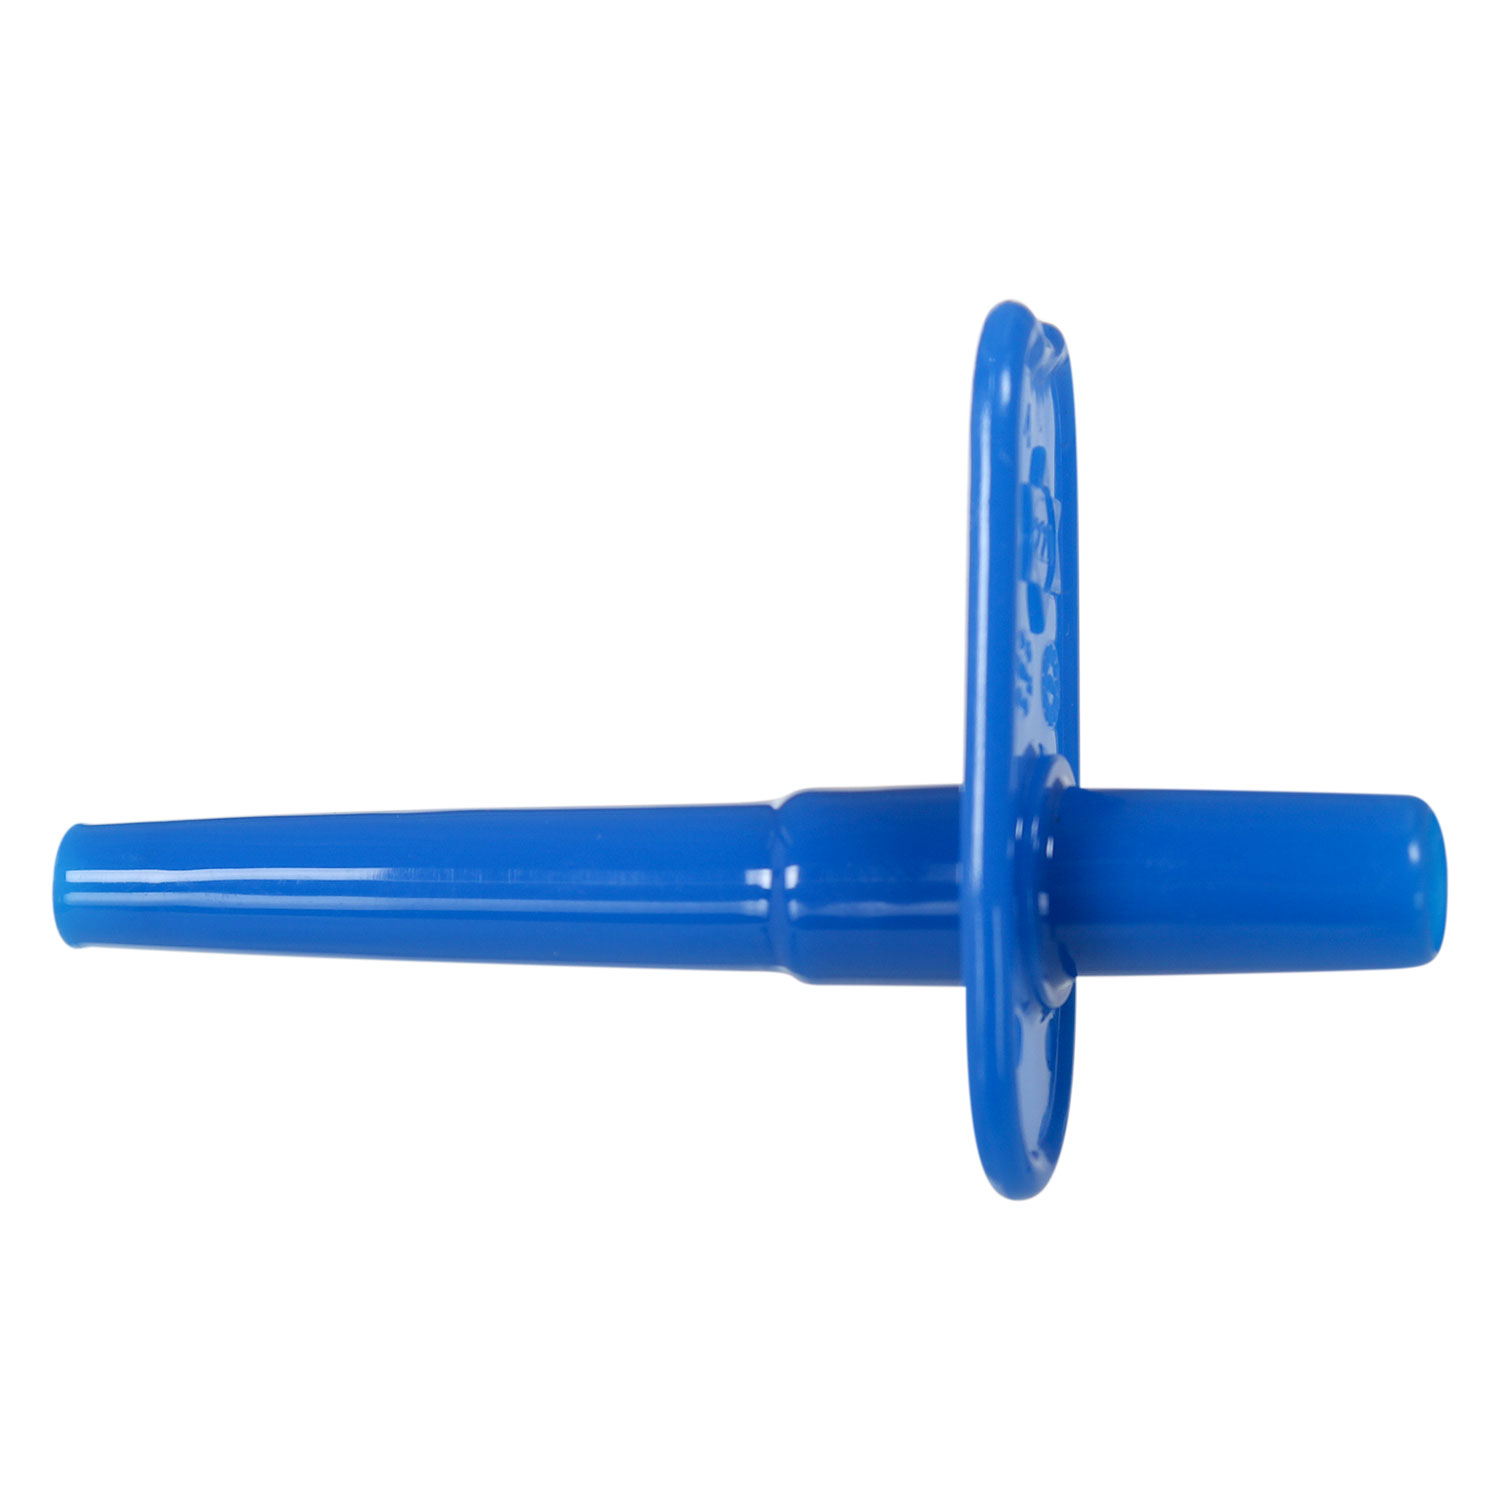 Ø 0.187" opaque Straight Sap Spout for 3/16" tubing